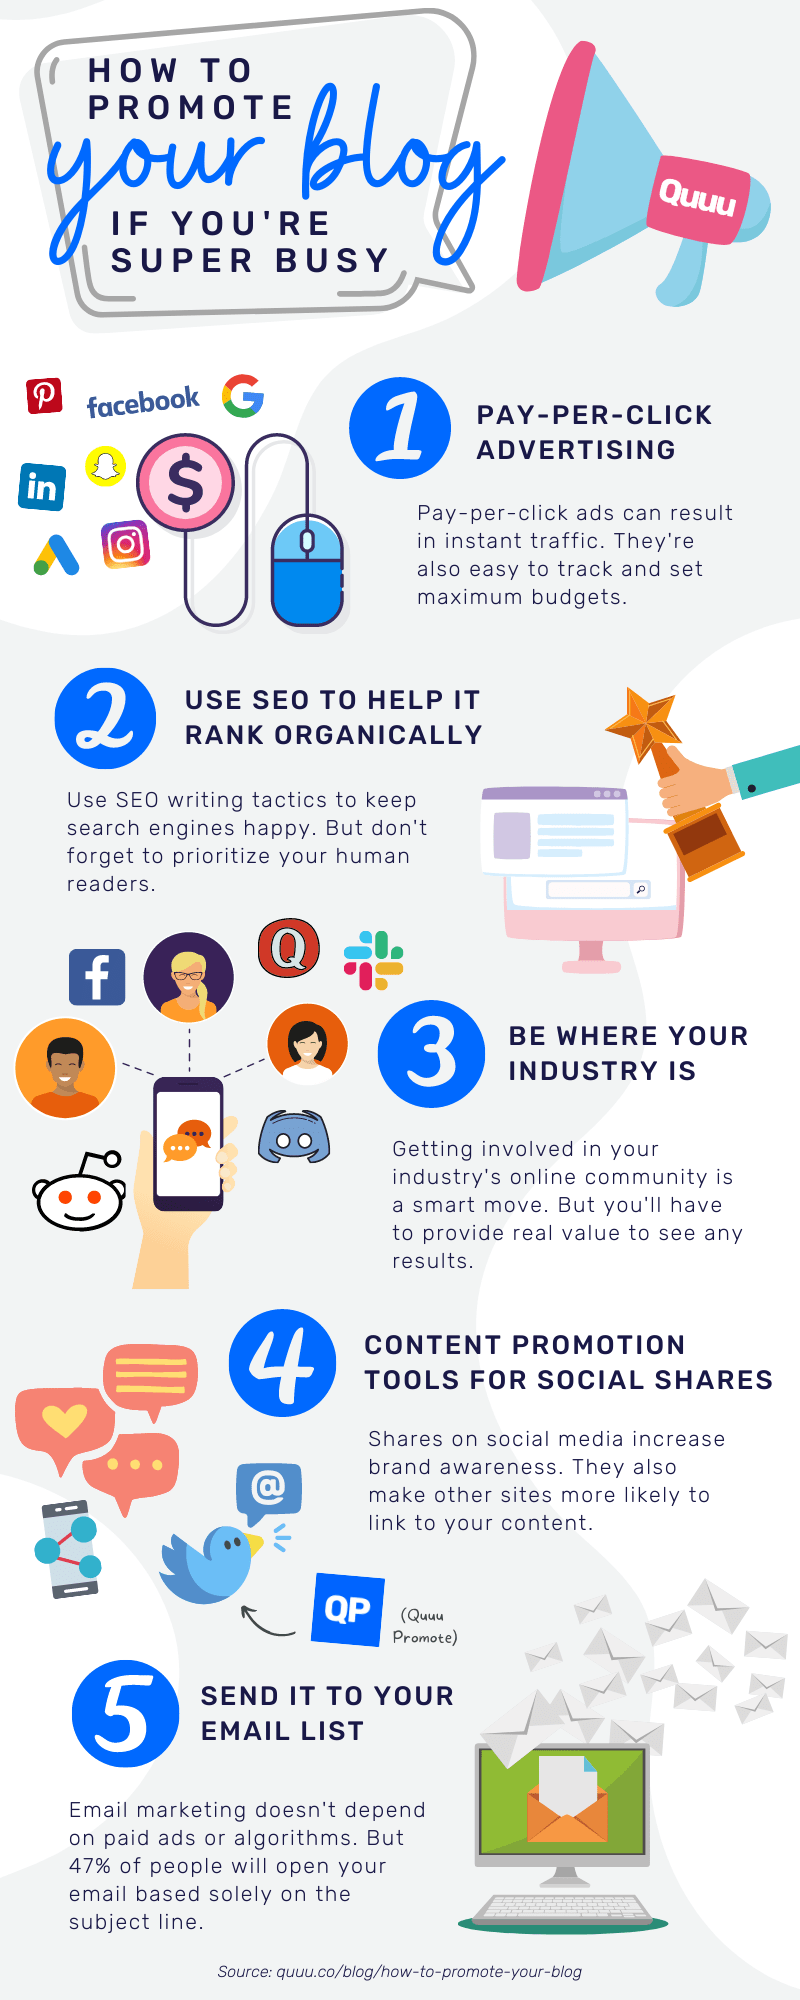 How to promote your blog if you're super busy:

1. PPC advertising
2. Use SEO to help it rank organically
3. Be where your industry is online
4. Use content promotion tools for social shares (like Quuu Promote)
5. Send it to your email list